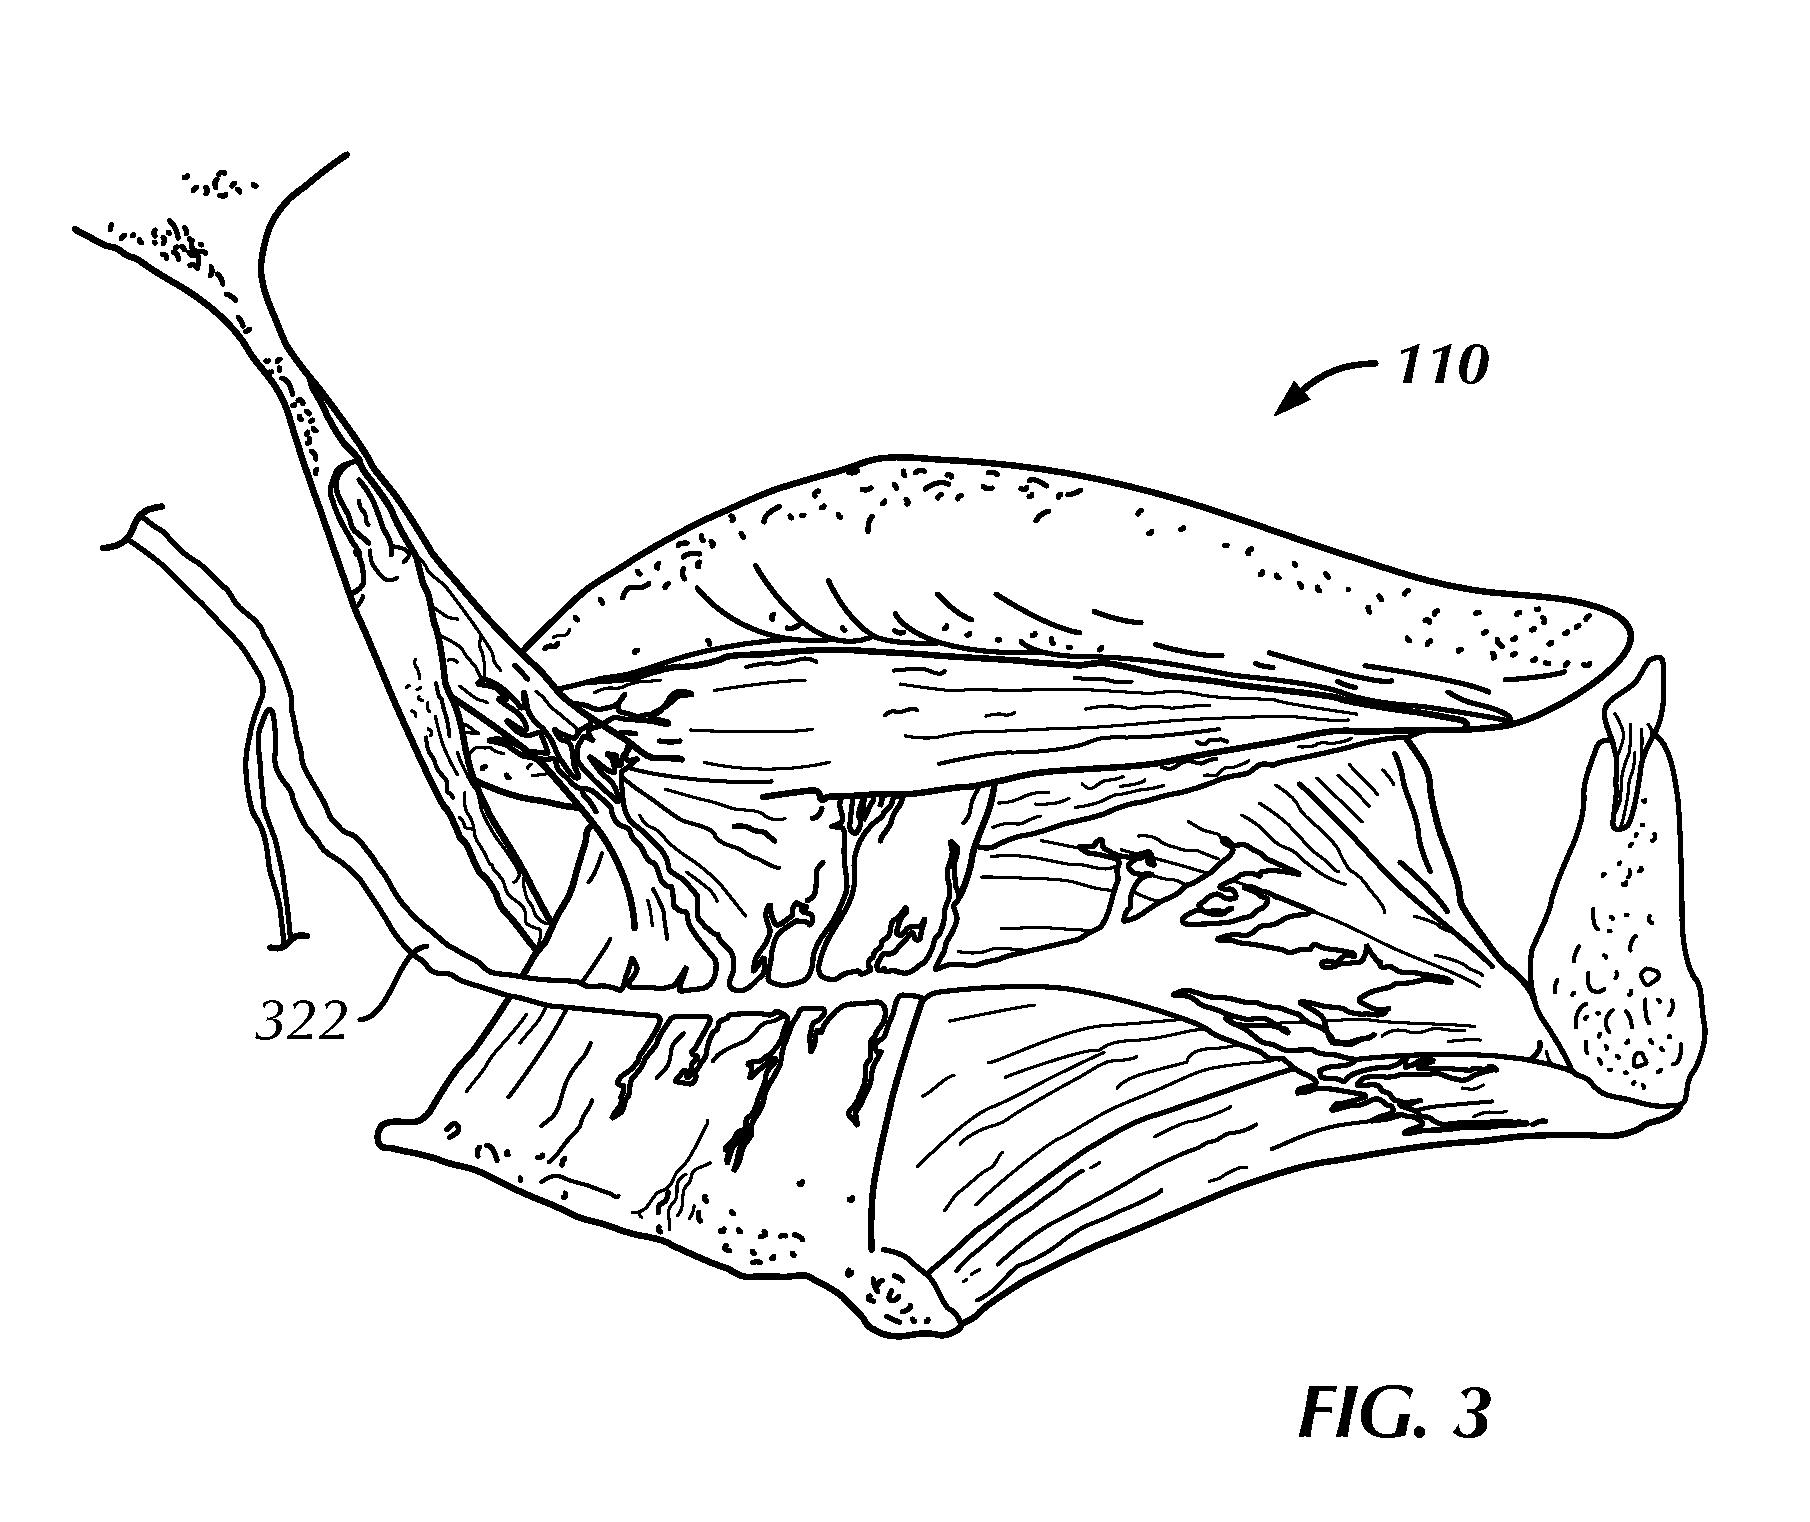 System for stimulating a hypoglossal nerve for controlling the position of a patient's tongue